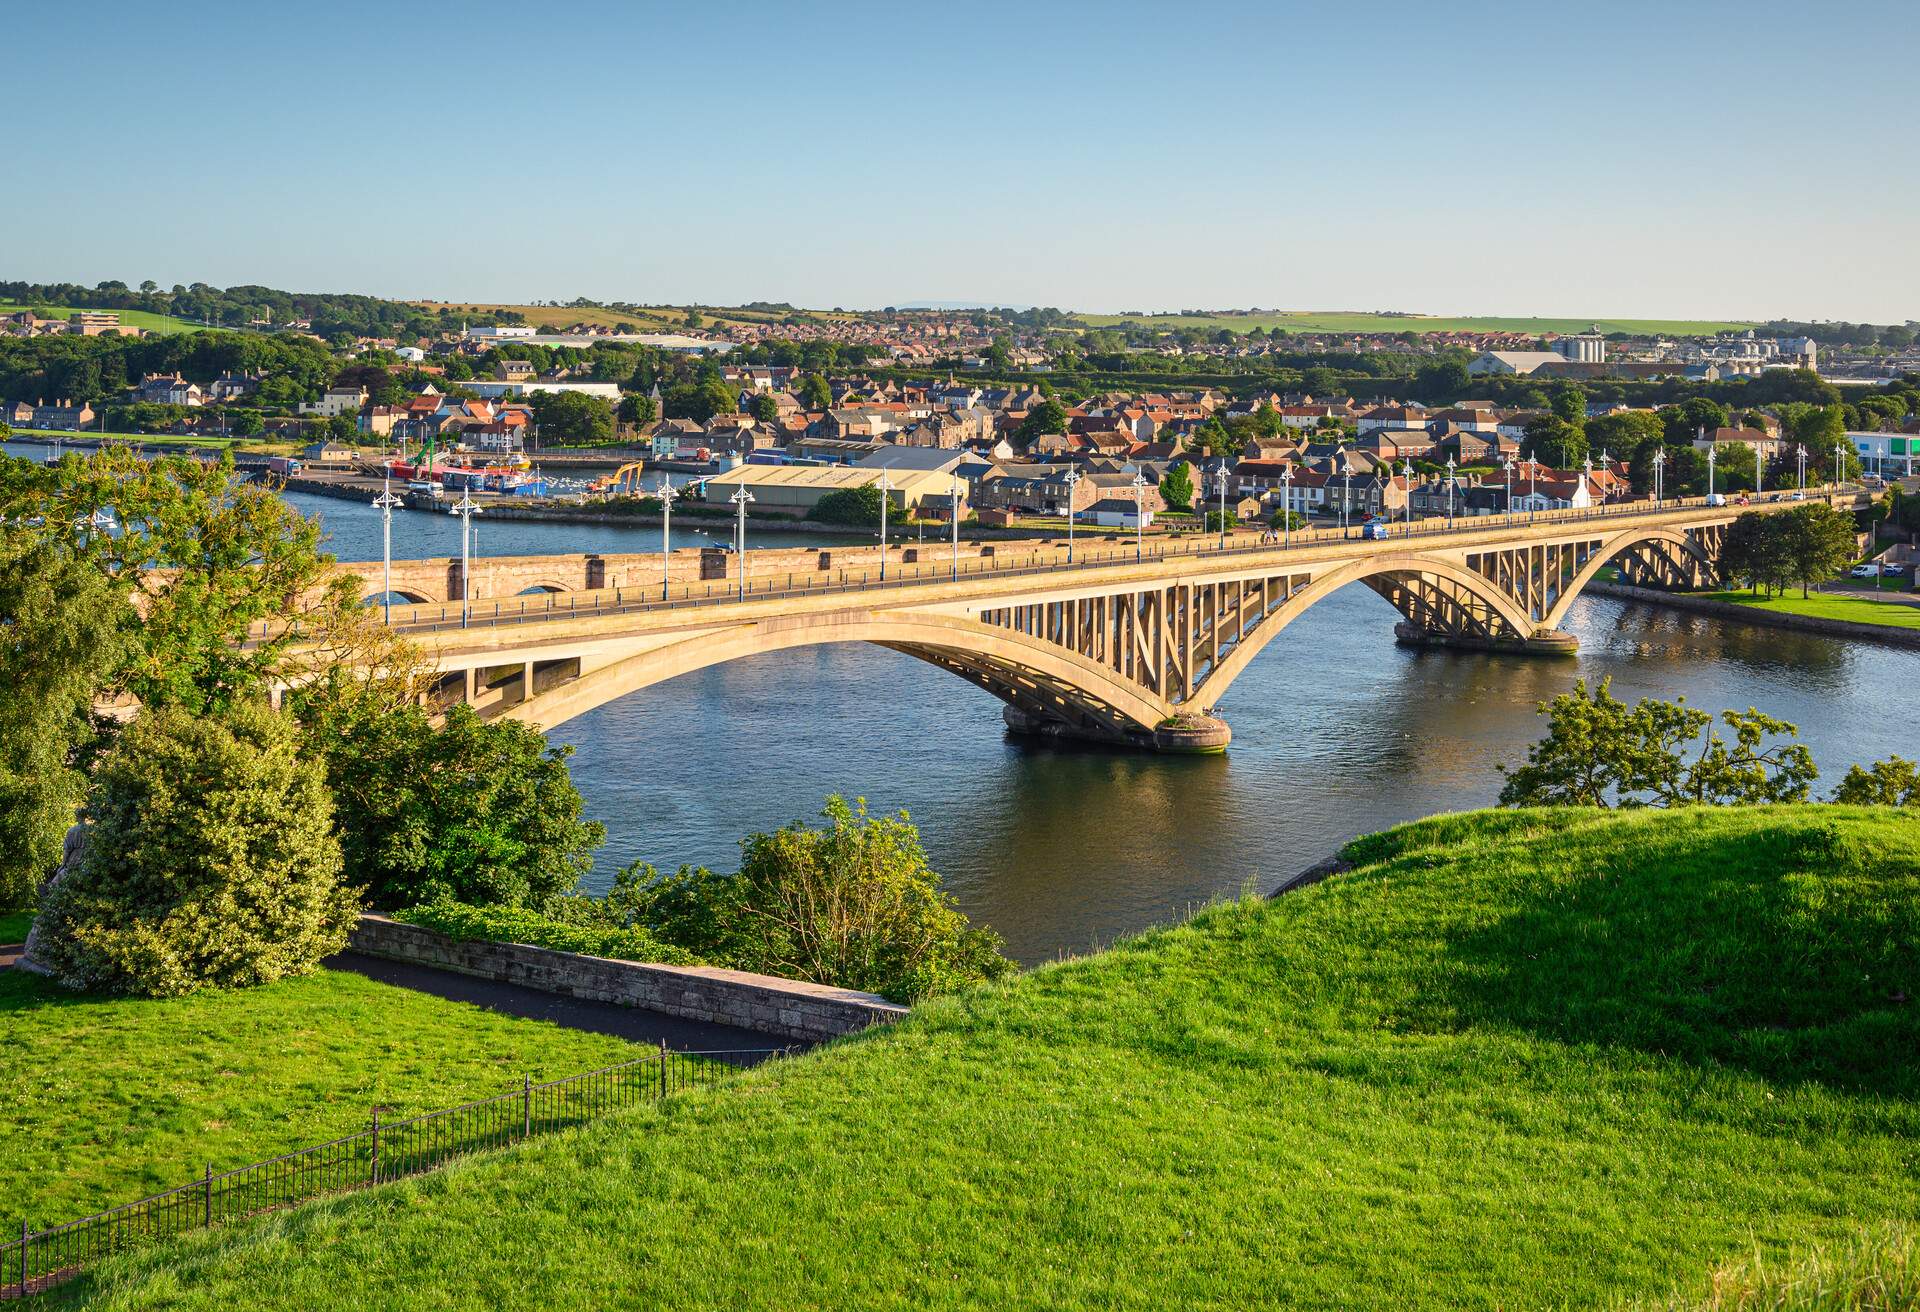 Berwick upon Tweed is the most northerly town in England and is located in Northumberland at the mouth of the River Tweed just below the Scottish border 